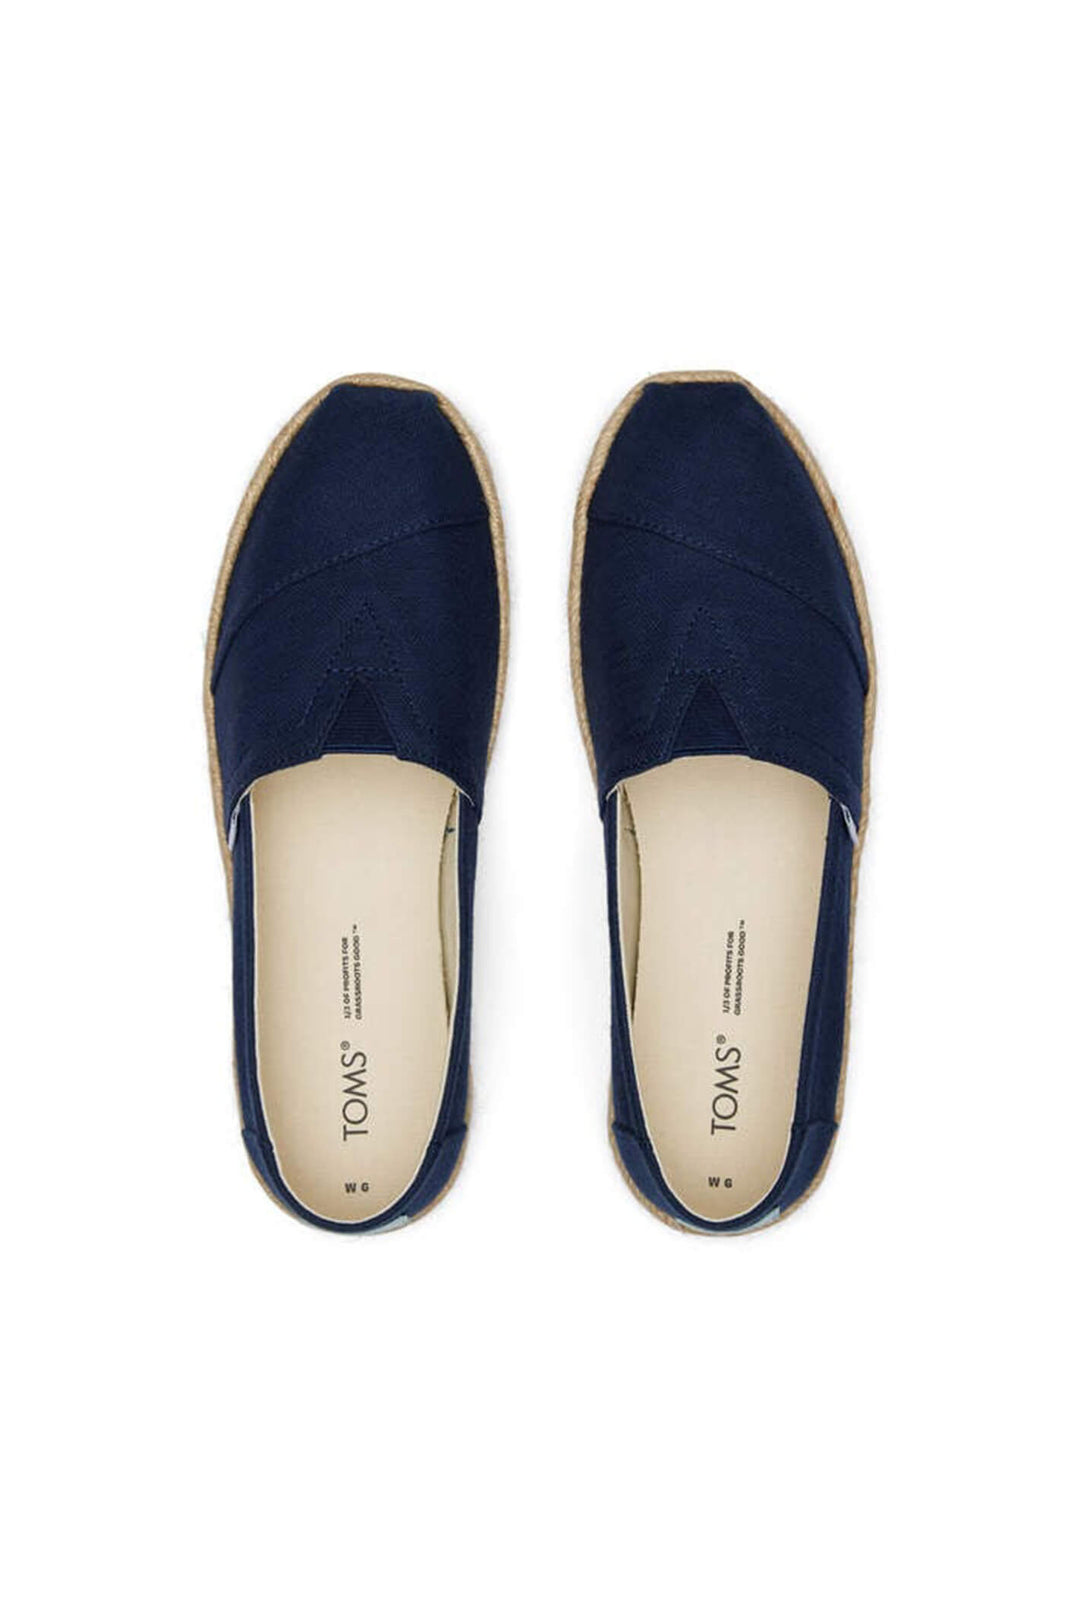 Toms Alpargata 10019674 Navy Recycled Cotton Rope Espadrille - Shirley Allum Boutique